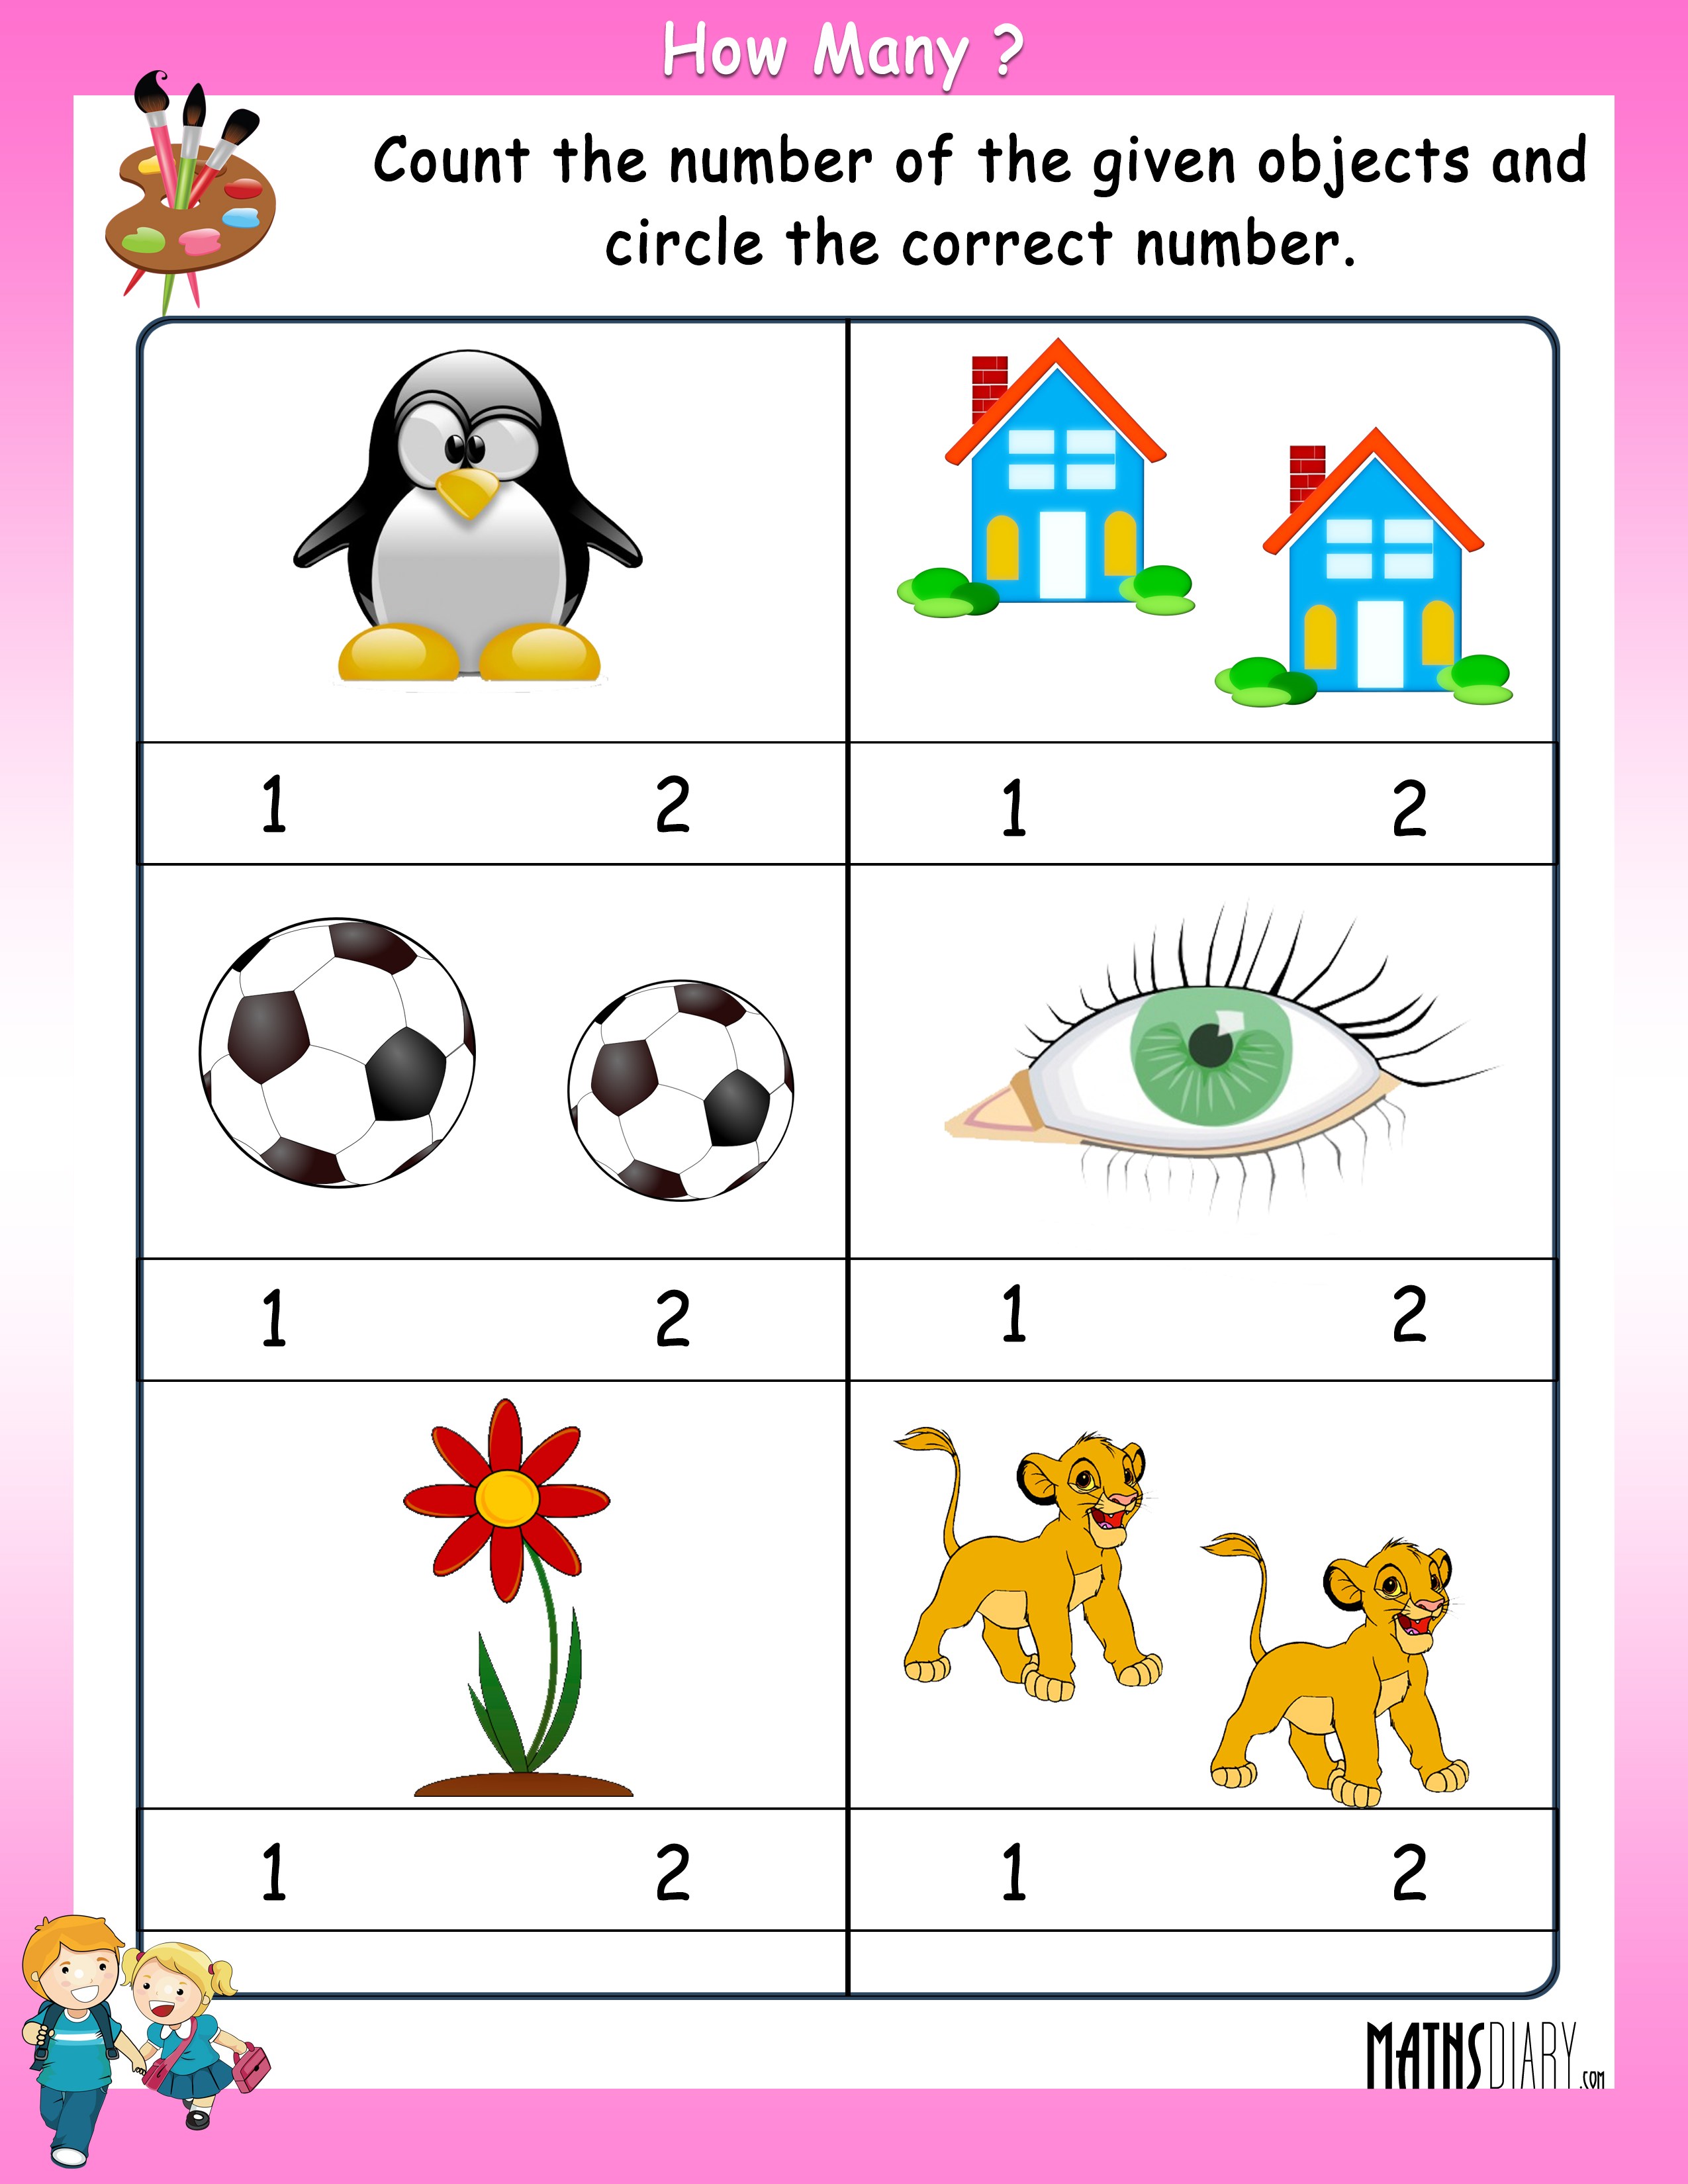 count-the-number-of-objects-worksheets-math-worksheets-mathsdiary